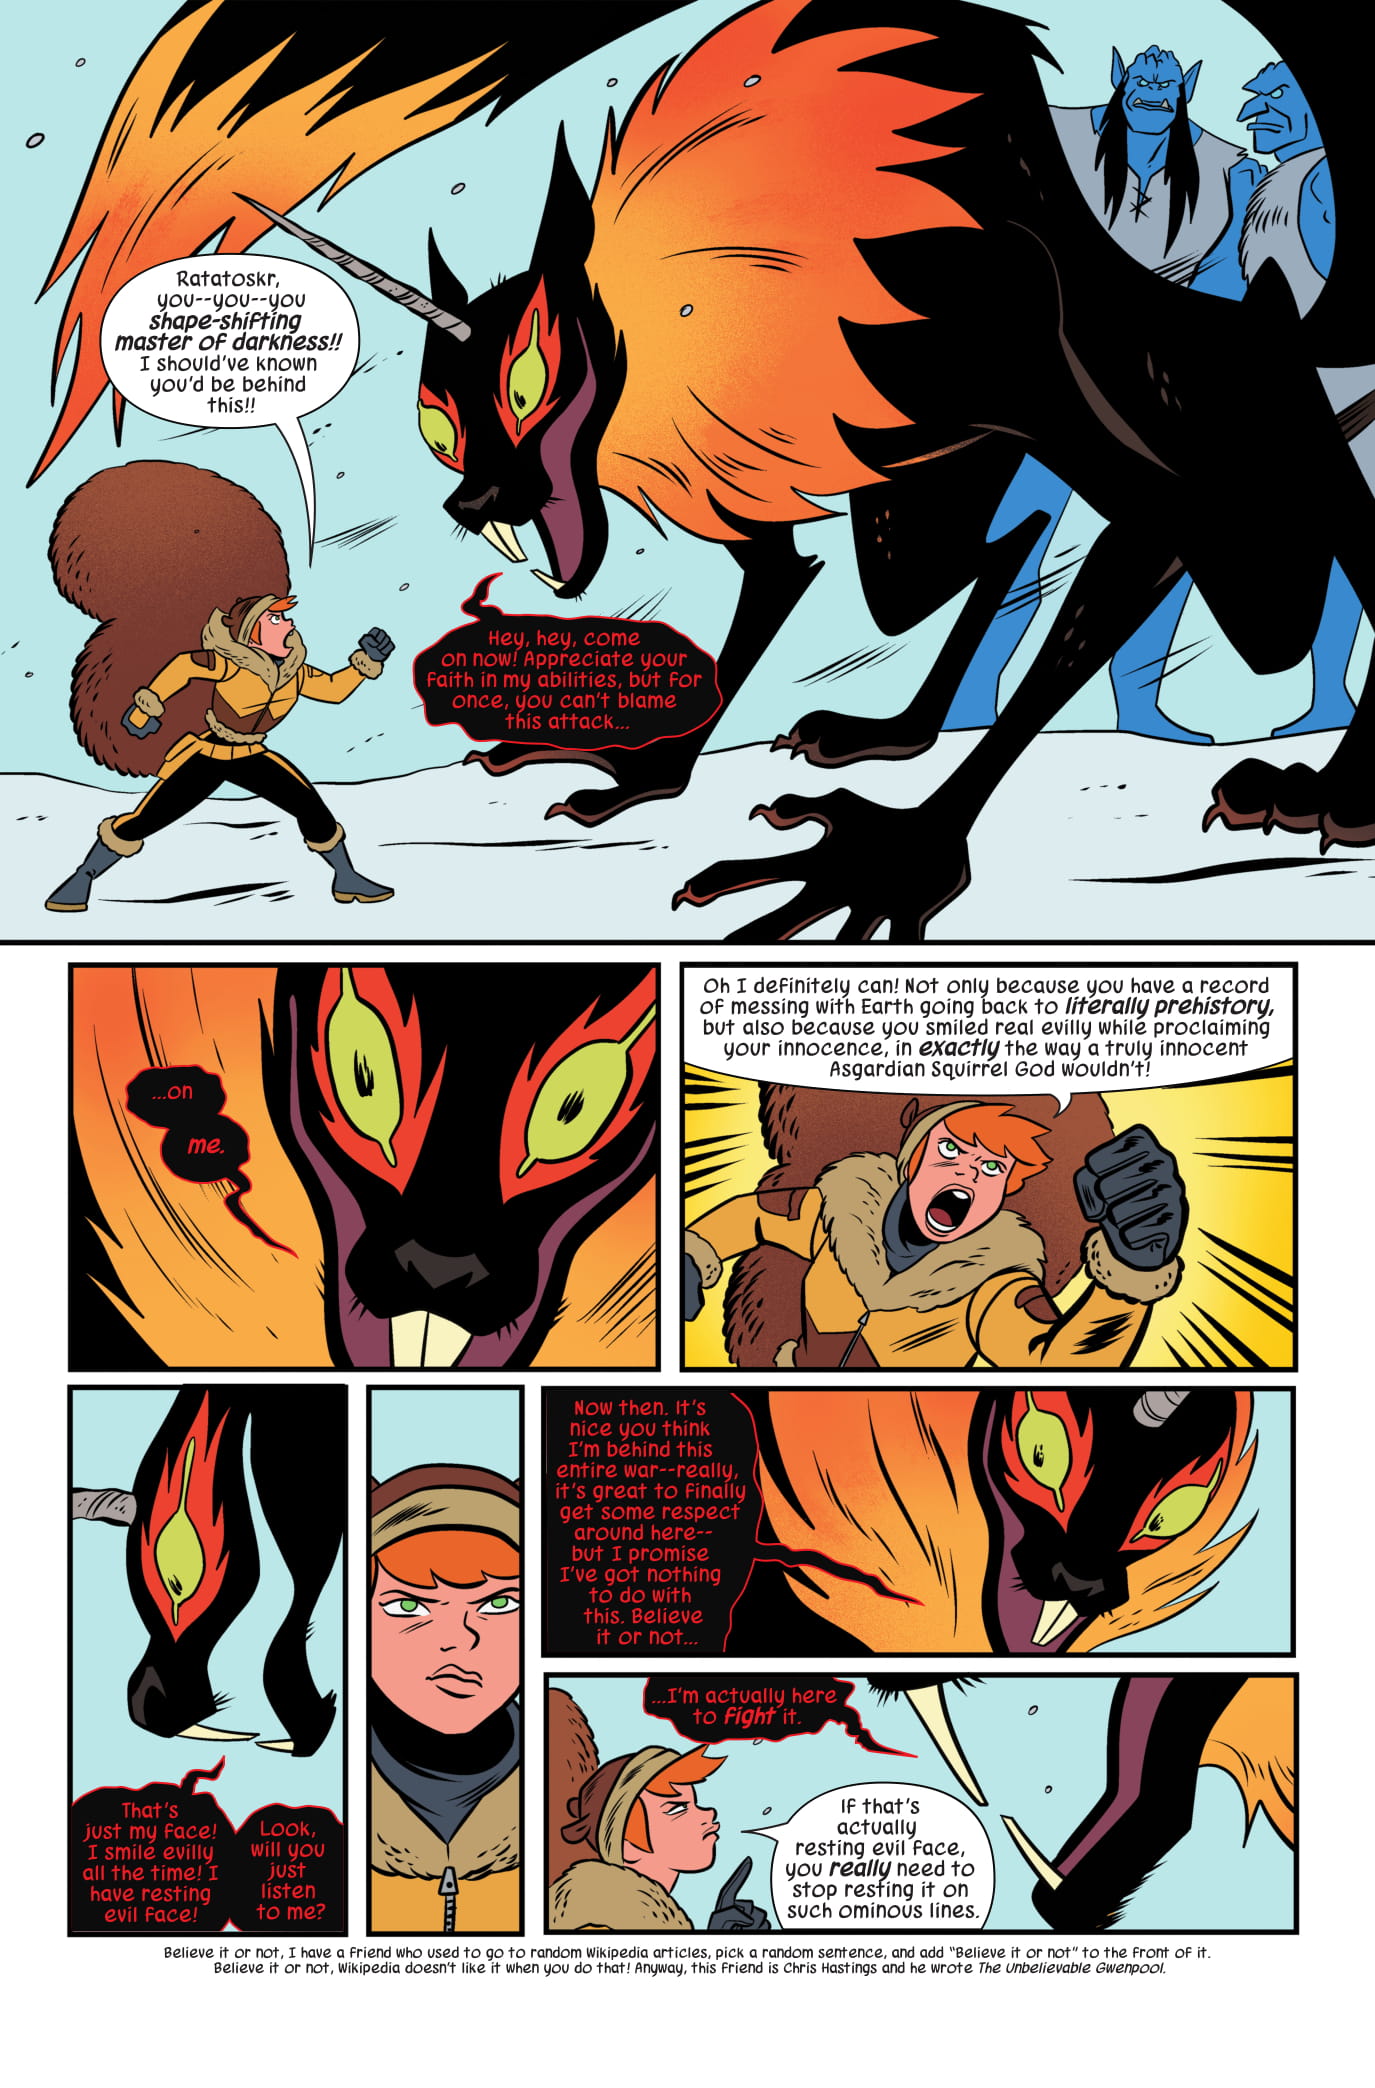 The Unbeatable Squirrel Girl #44 page 1